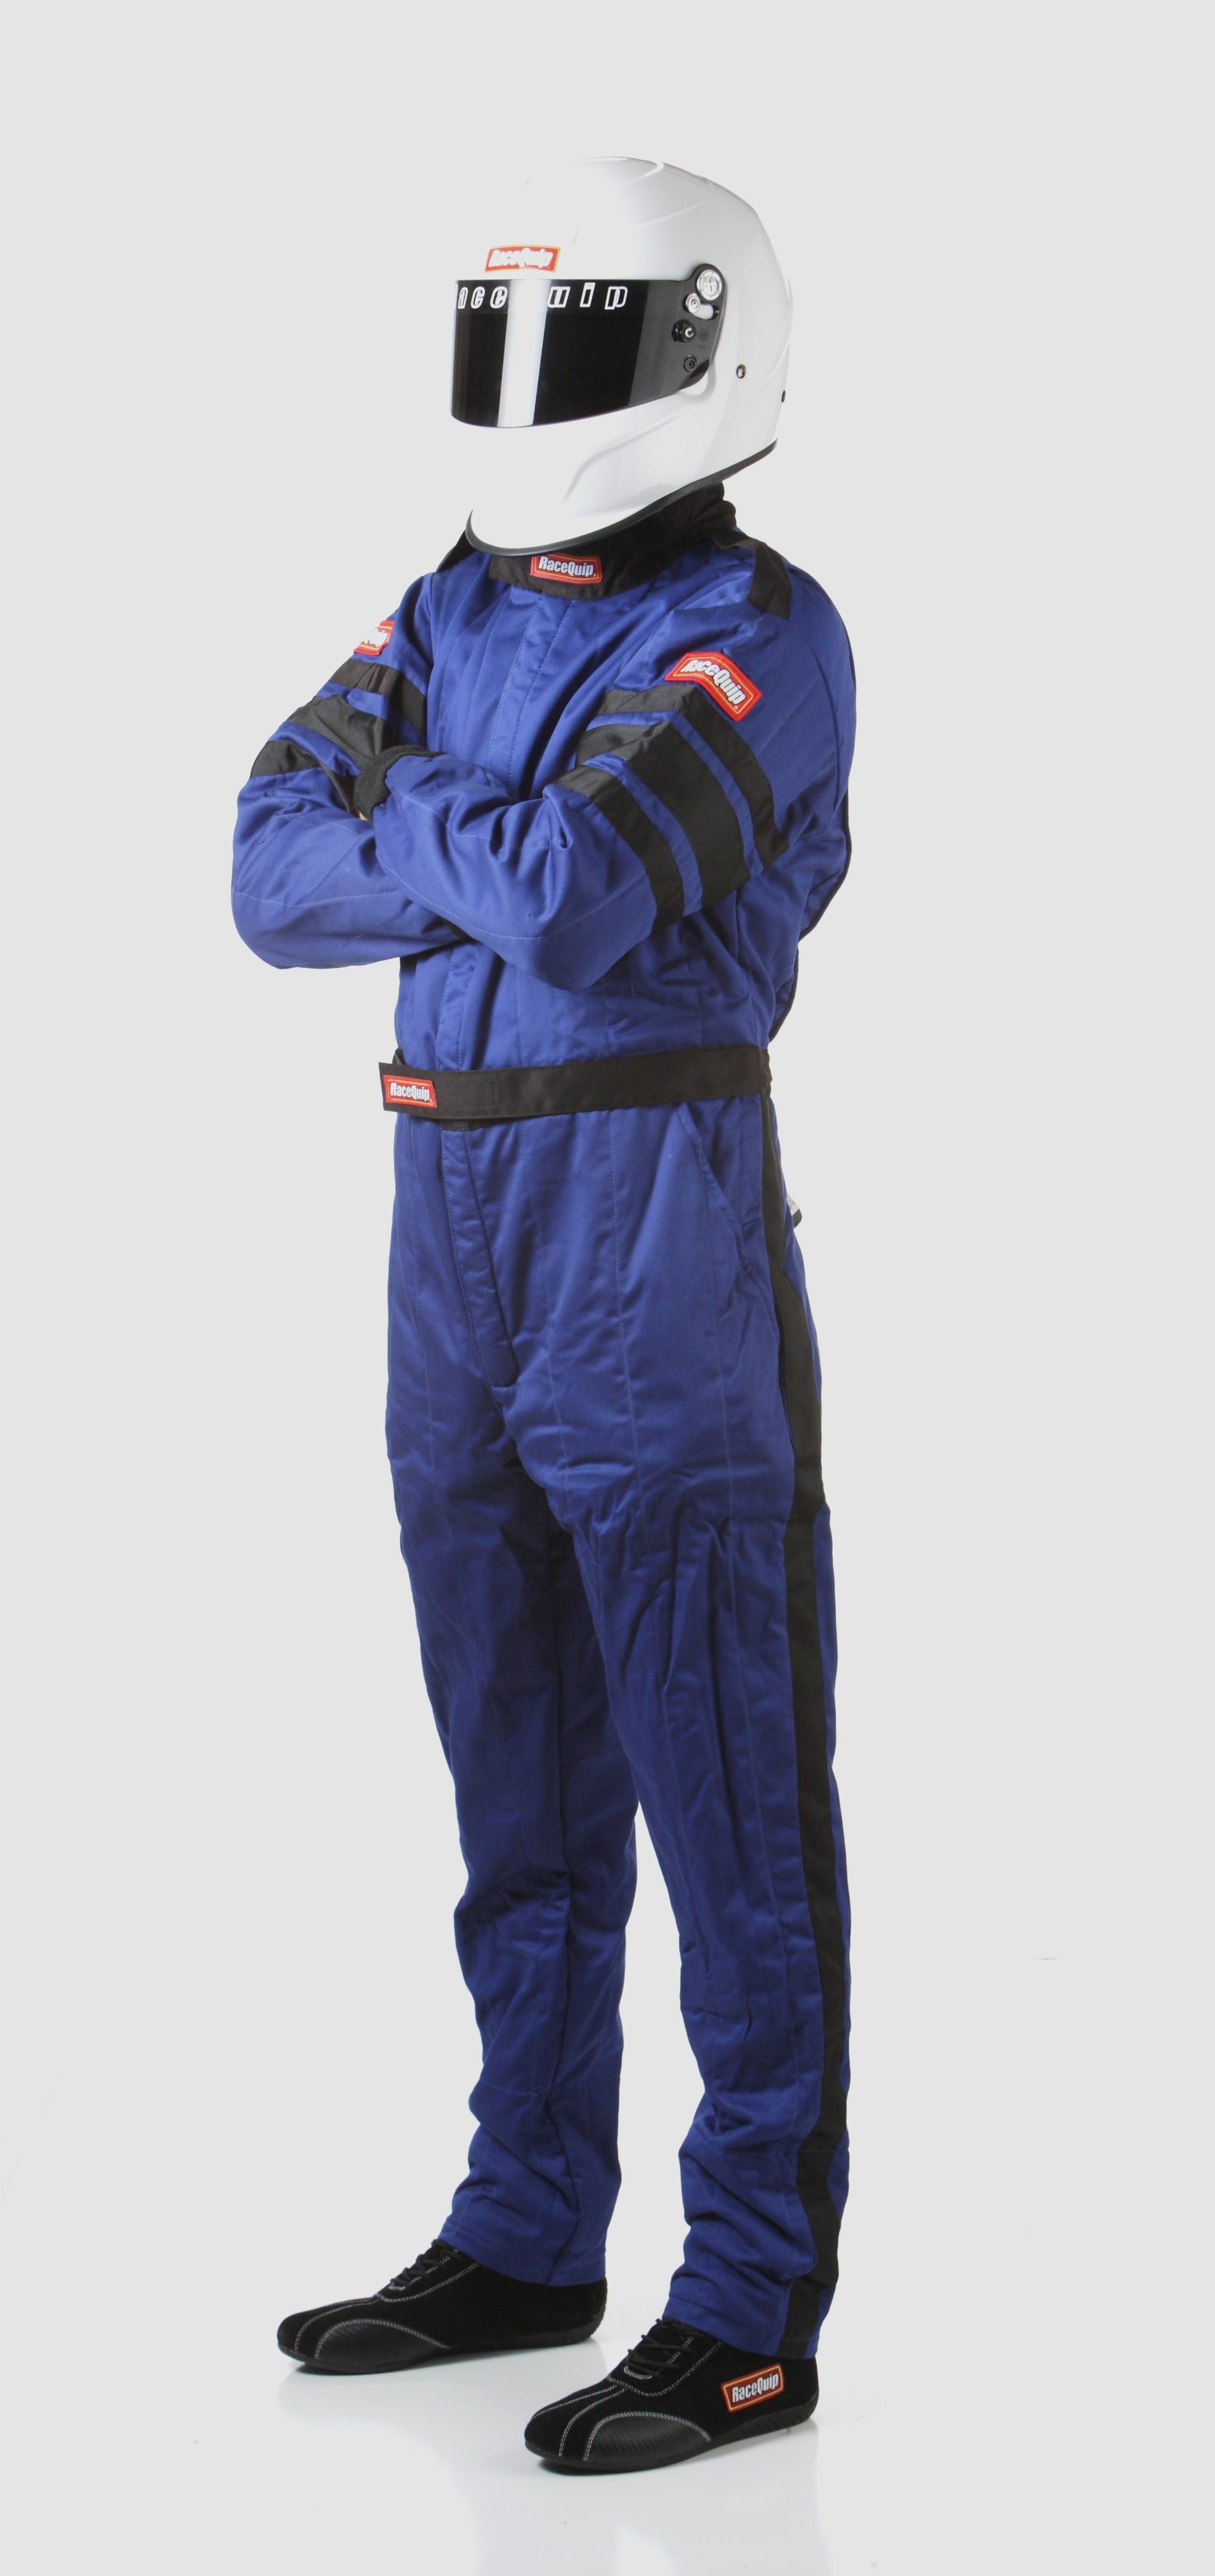 RaceQuip 120025 SFI-5 Pyrovatex One-Piece Multi-Layer Racing Fire Suit (Blue, Large)